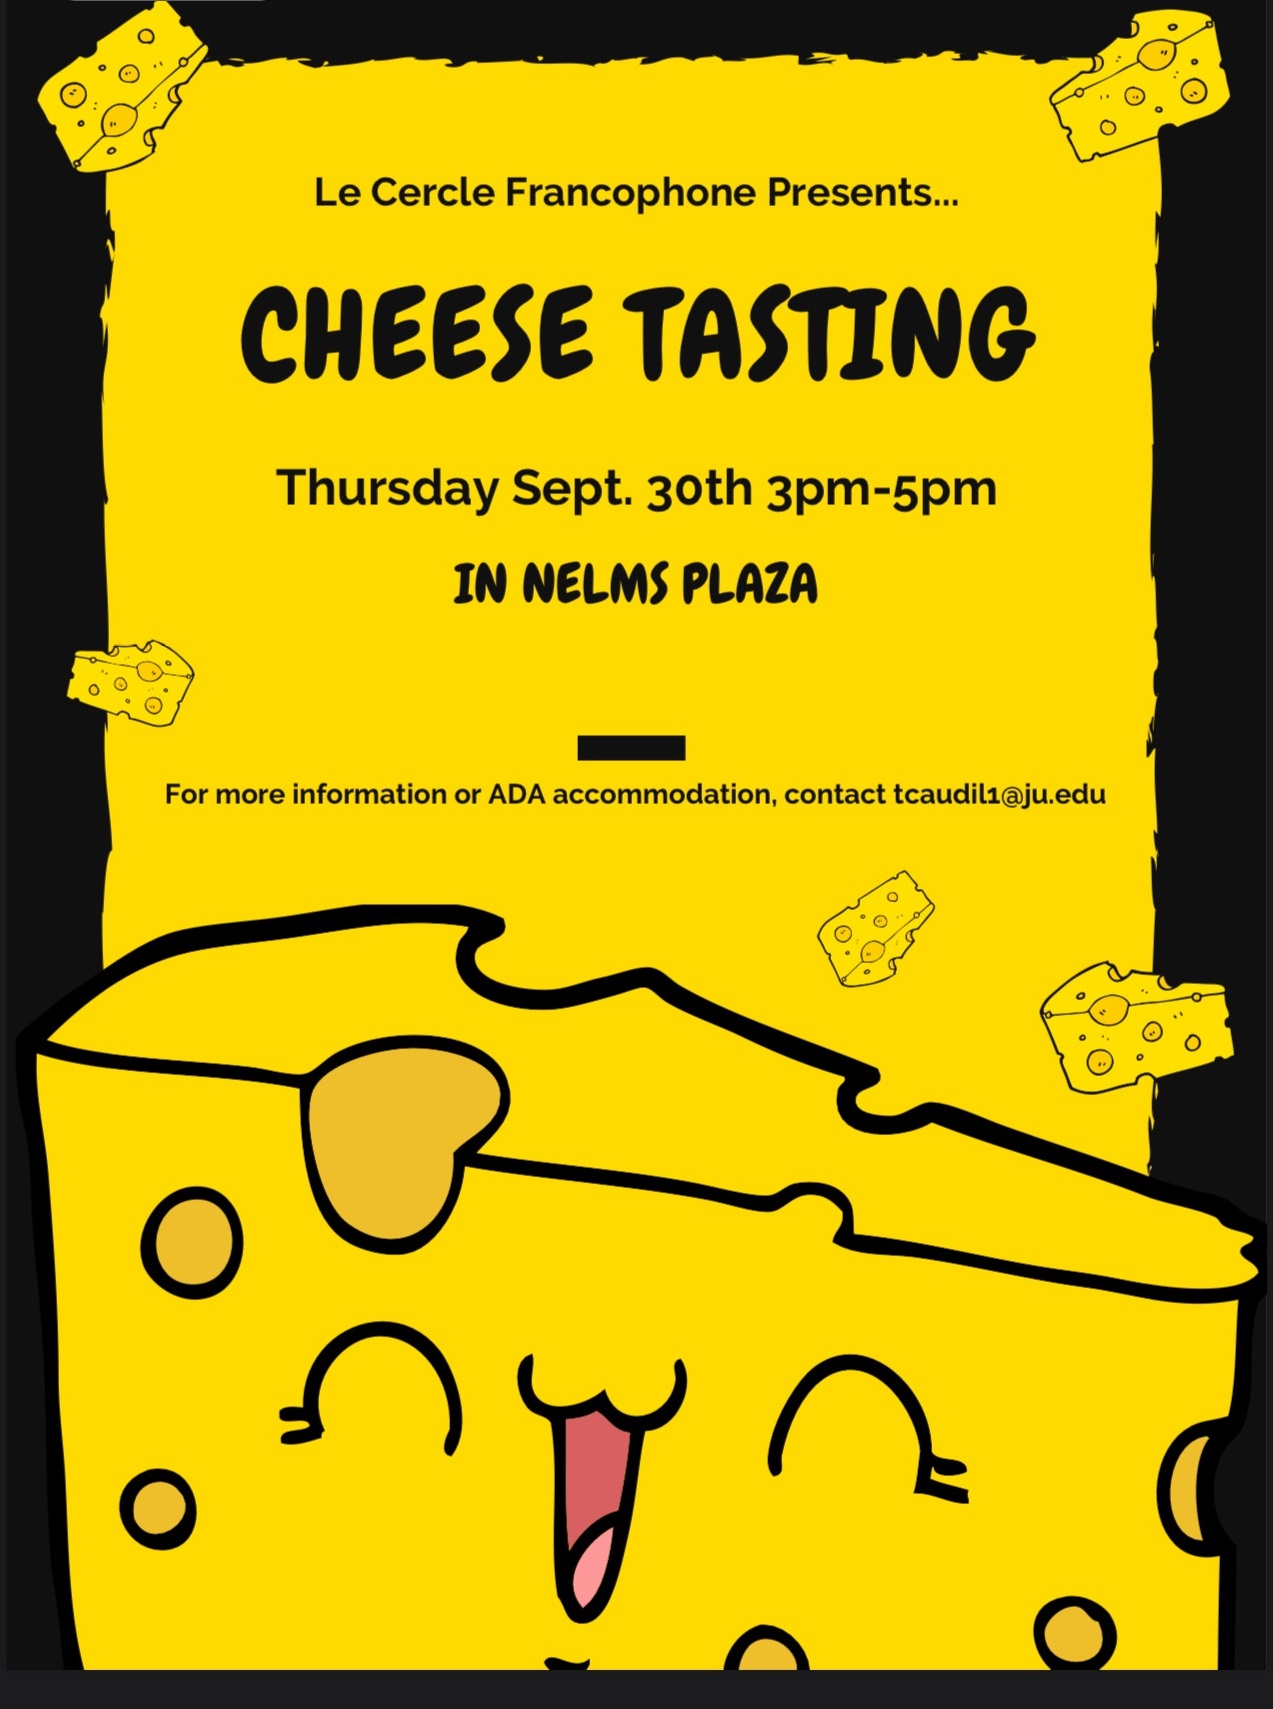 Cheese tasting flyer